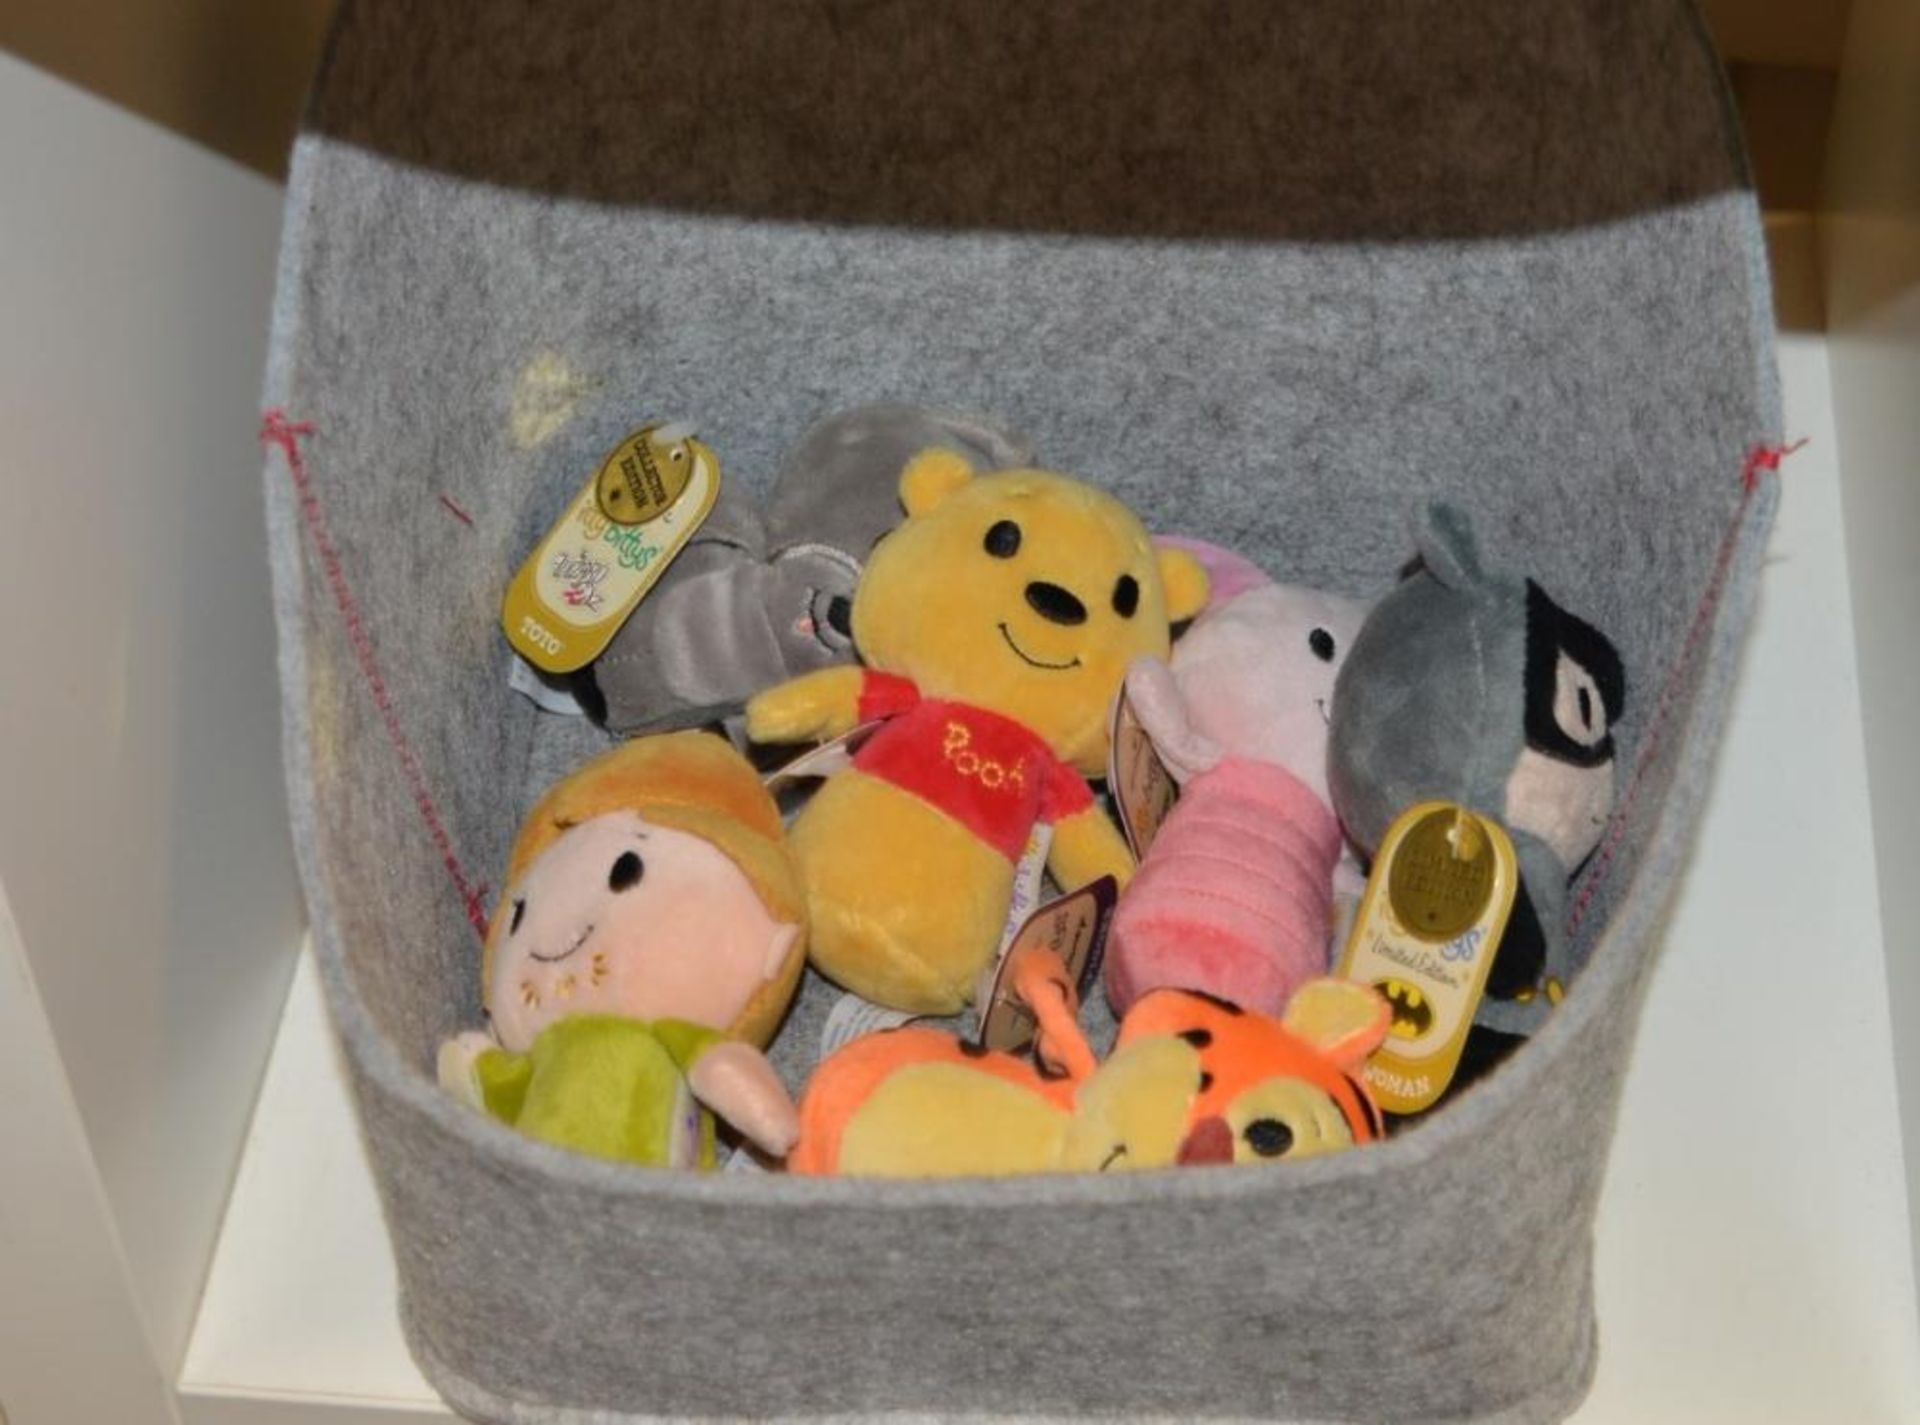 Approx 100 x Hallmark Itty Bittsy Character Soft Toys With 18 x Storage Baskets - Ref BB - CL351 - L - Image 11 of 19